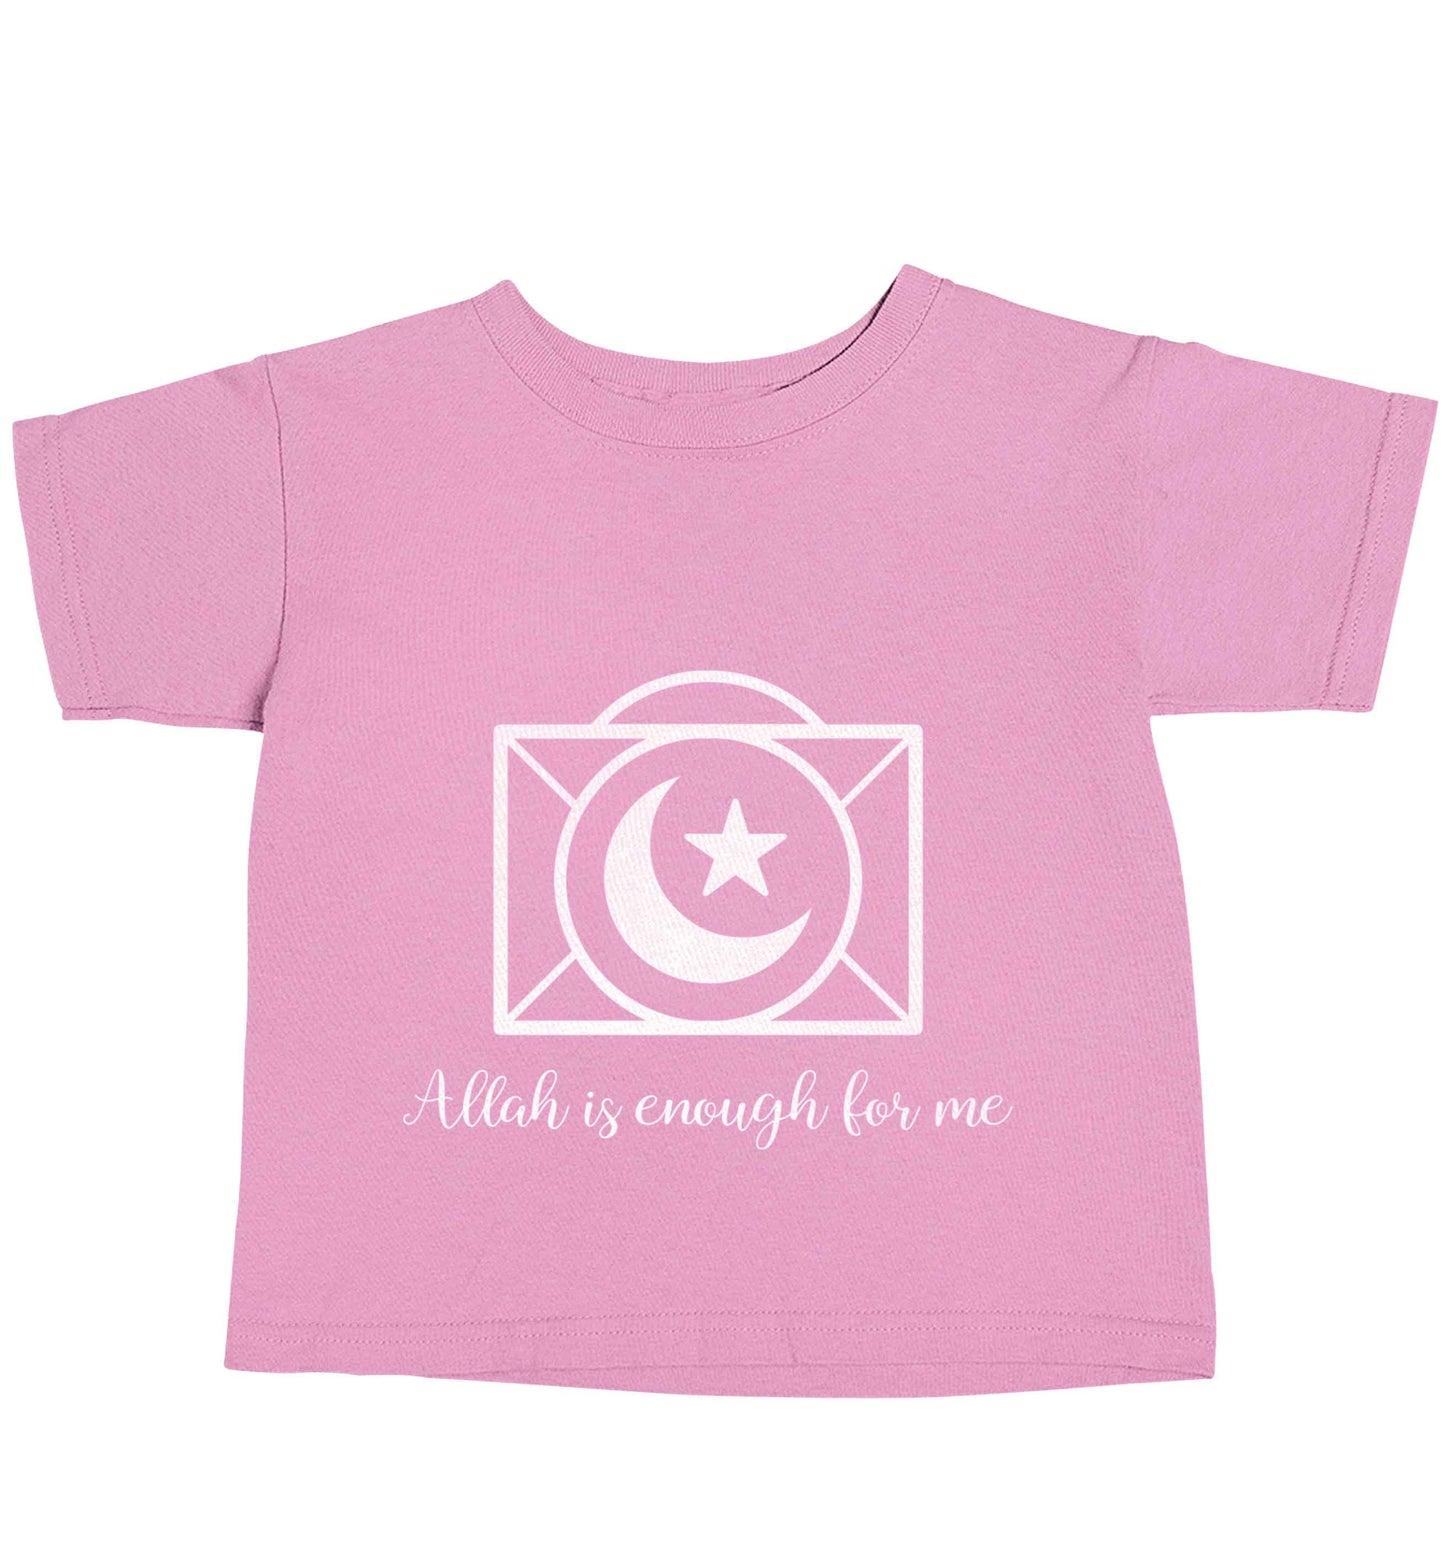 Allah is enough for me light pink baby toddler Tshirt 2 Years